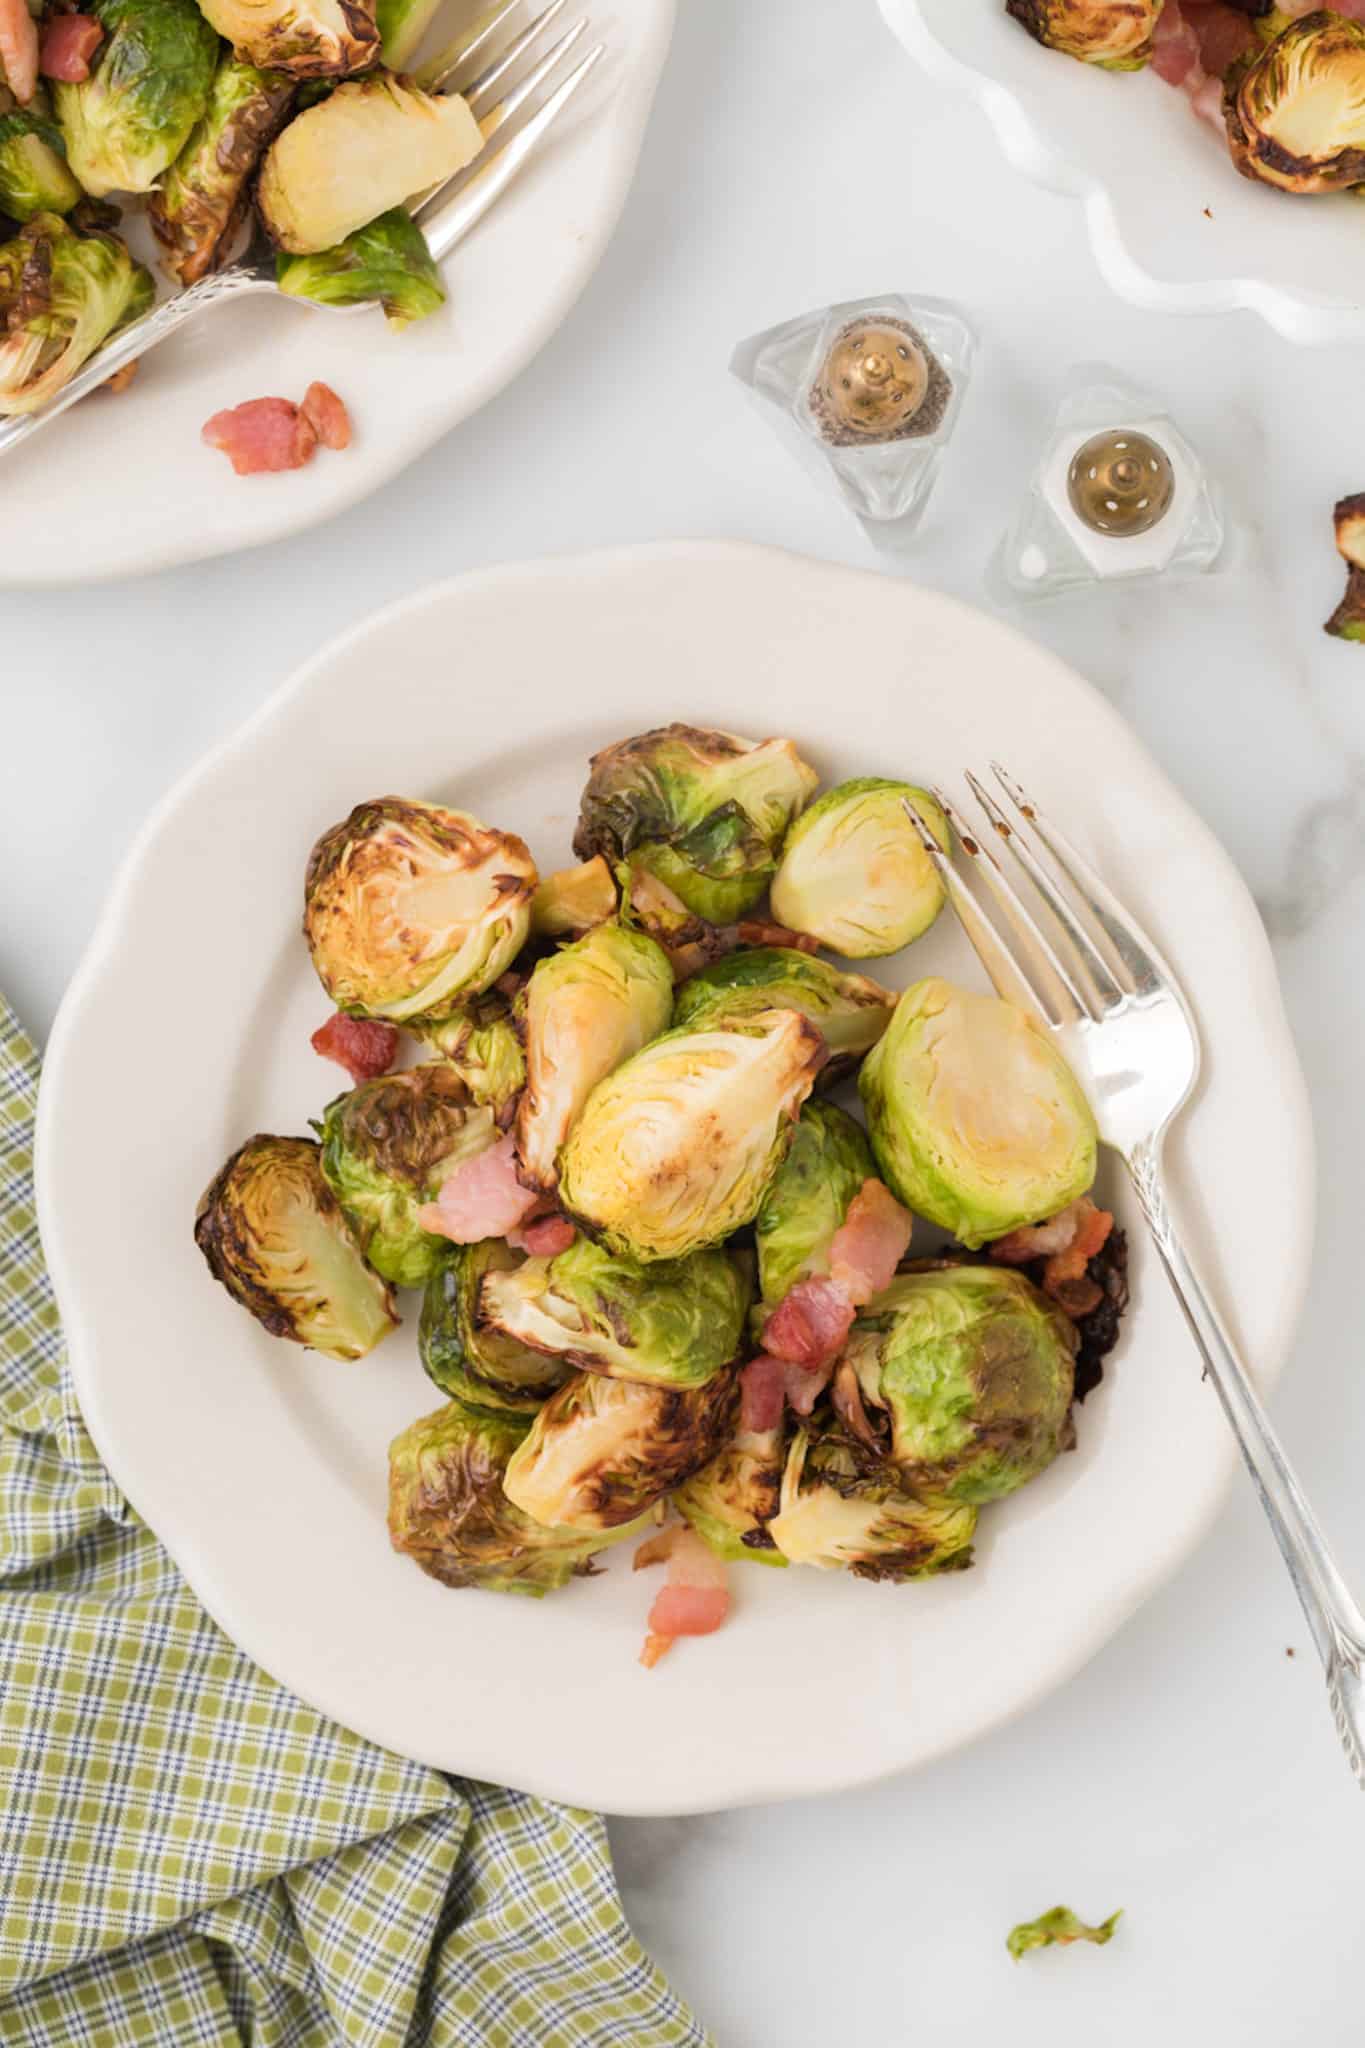 two plates with servings of brussel sprouts